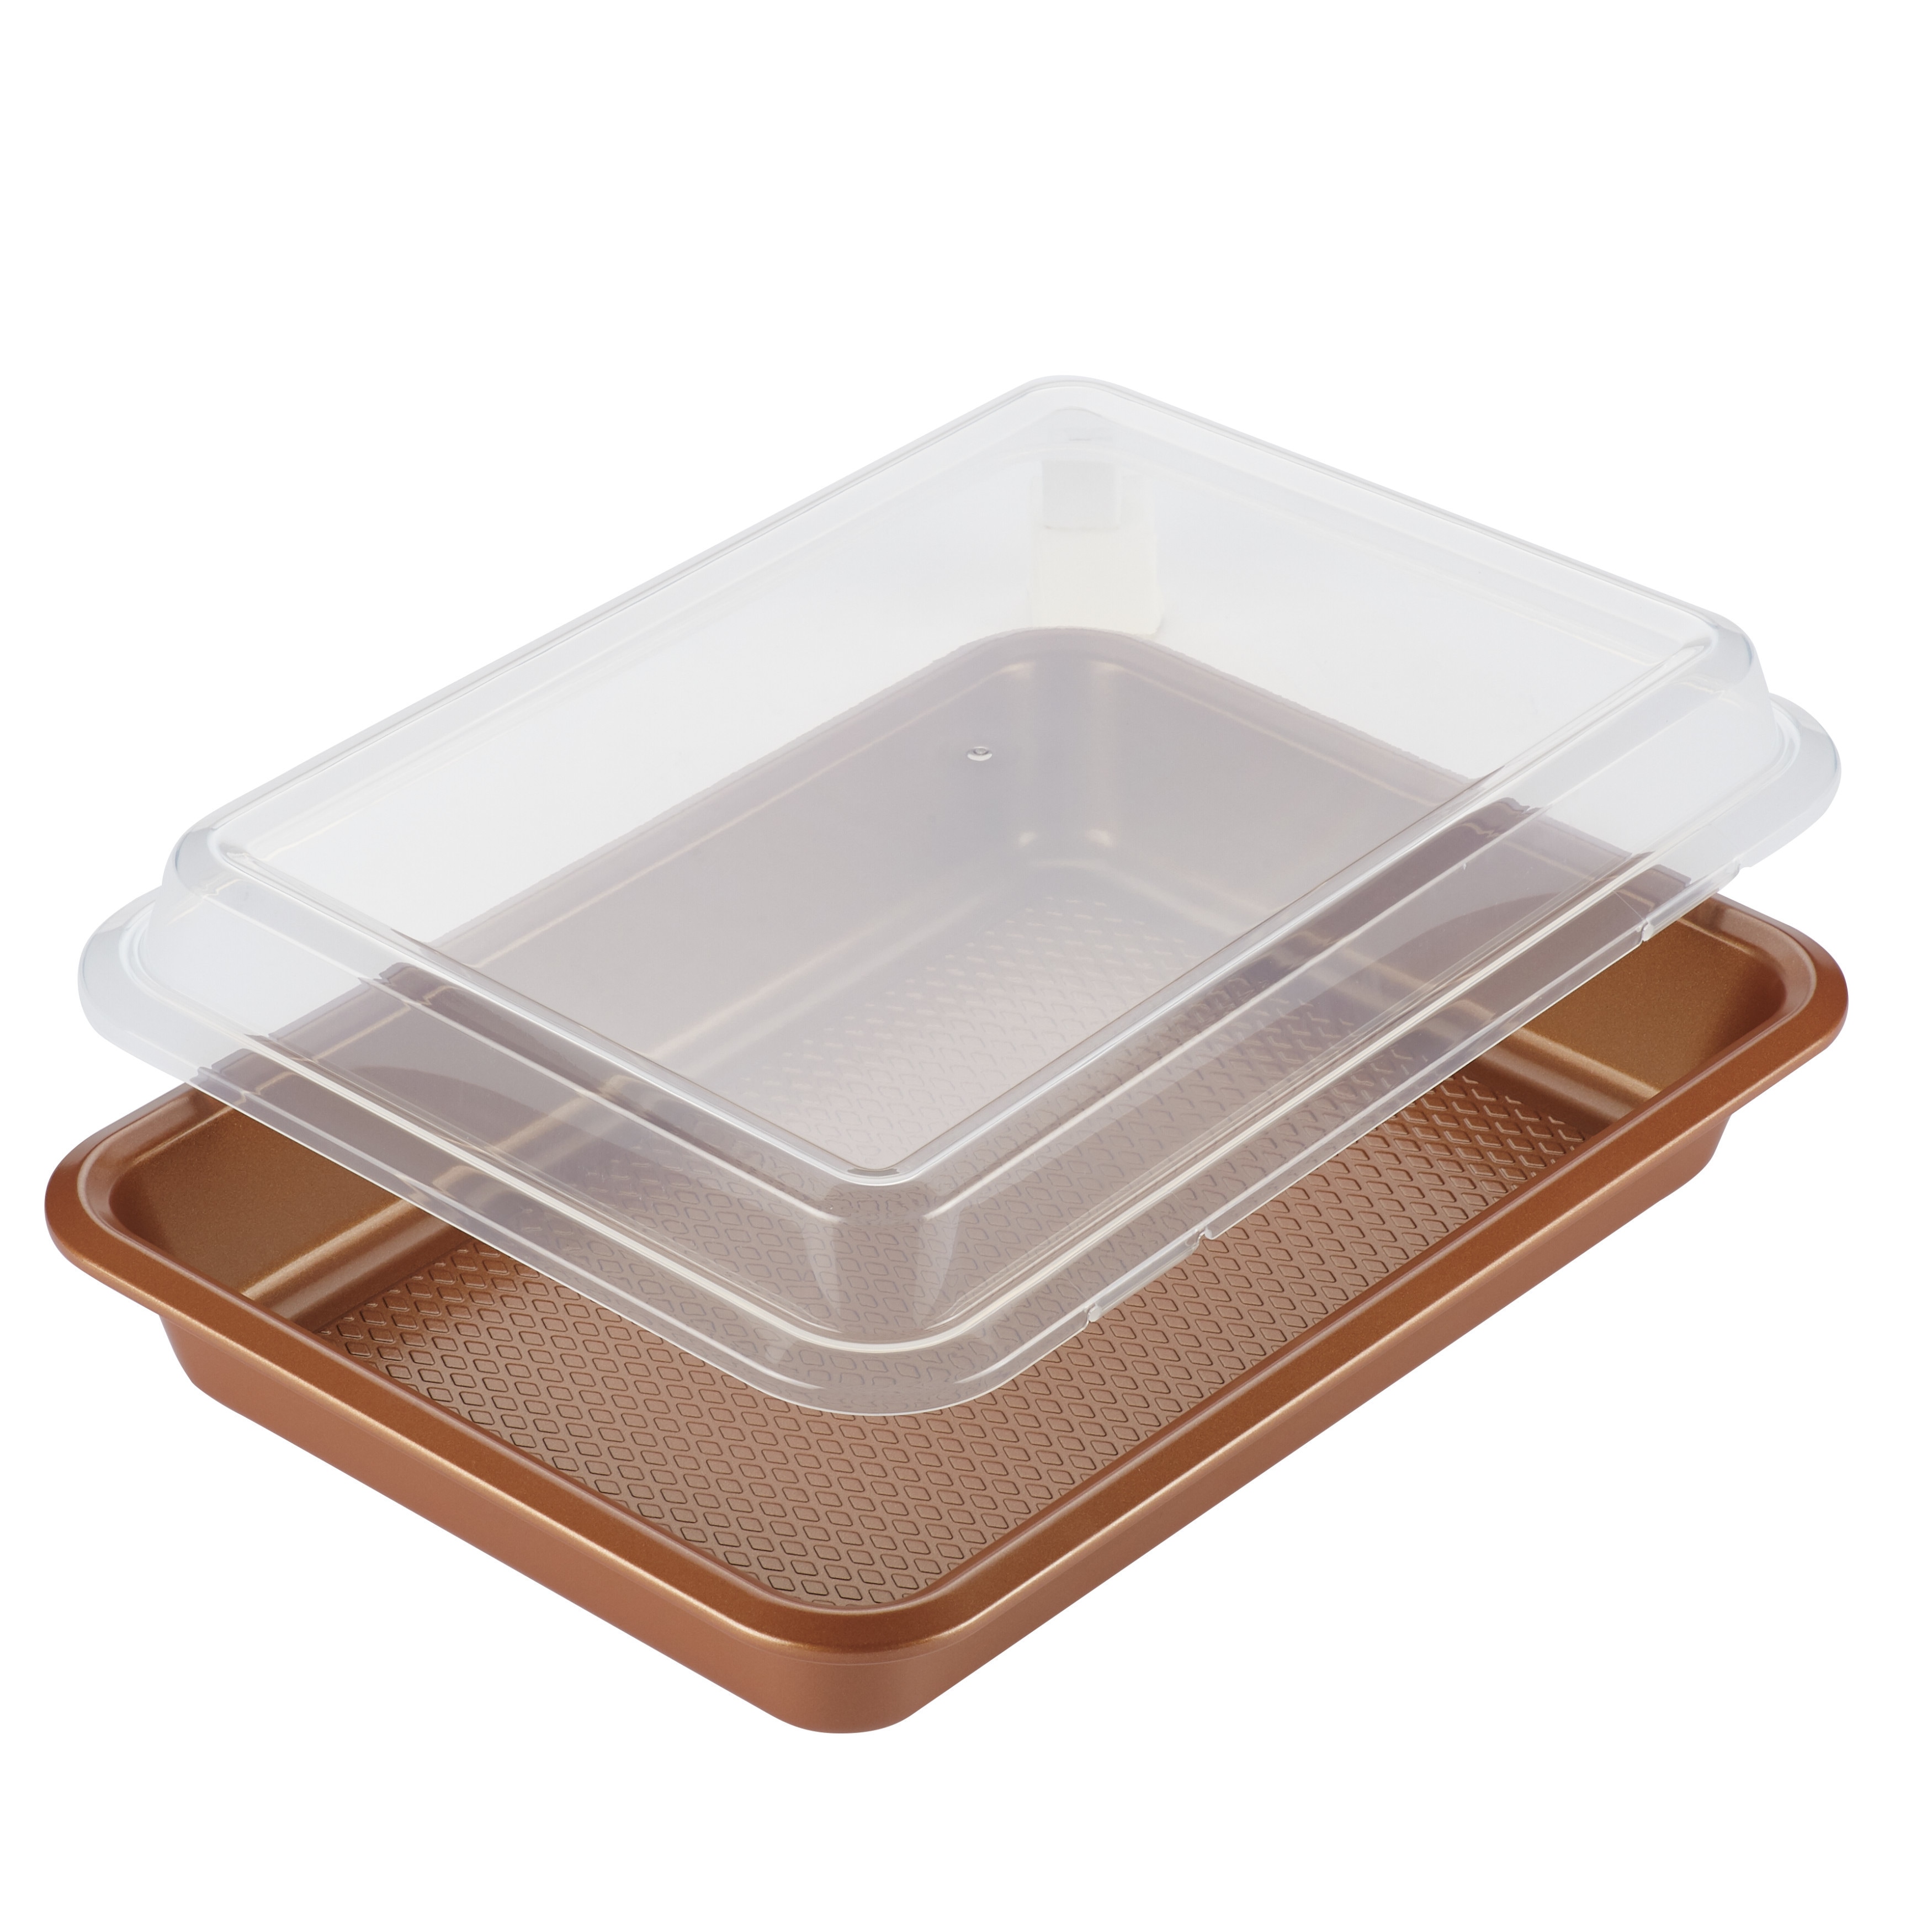 https://ak1.ostkcdn.com/images/products/20007003/Ayesha-Curry-Bakeware-Covered-Cake-Pan-9-Inch-x-13-Inch-Copper-63991880-99cb-4528-b348-4135422663b1.jpg